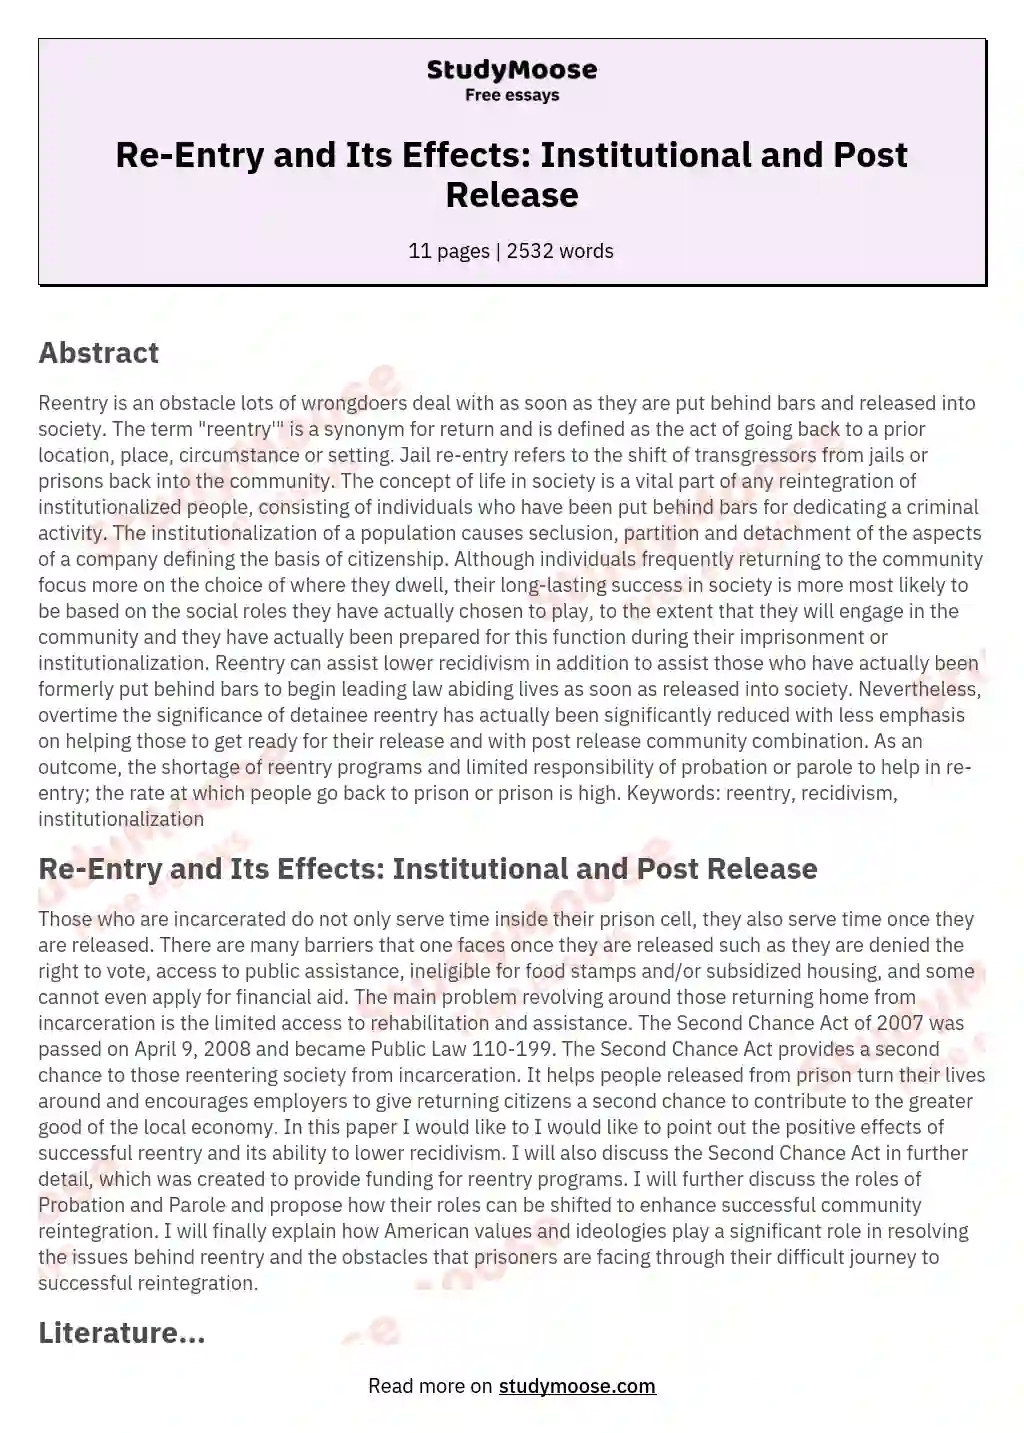 Re-Entry and Its Effects: Institutional and Post Release